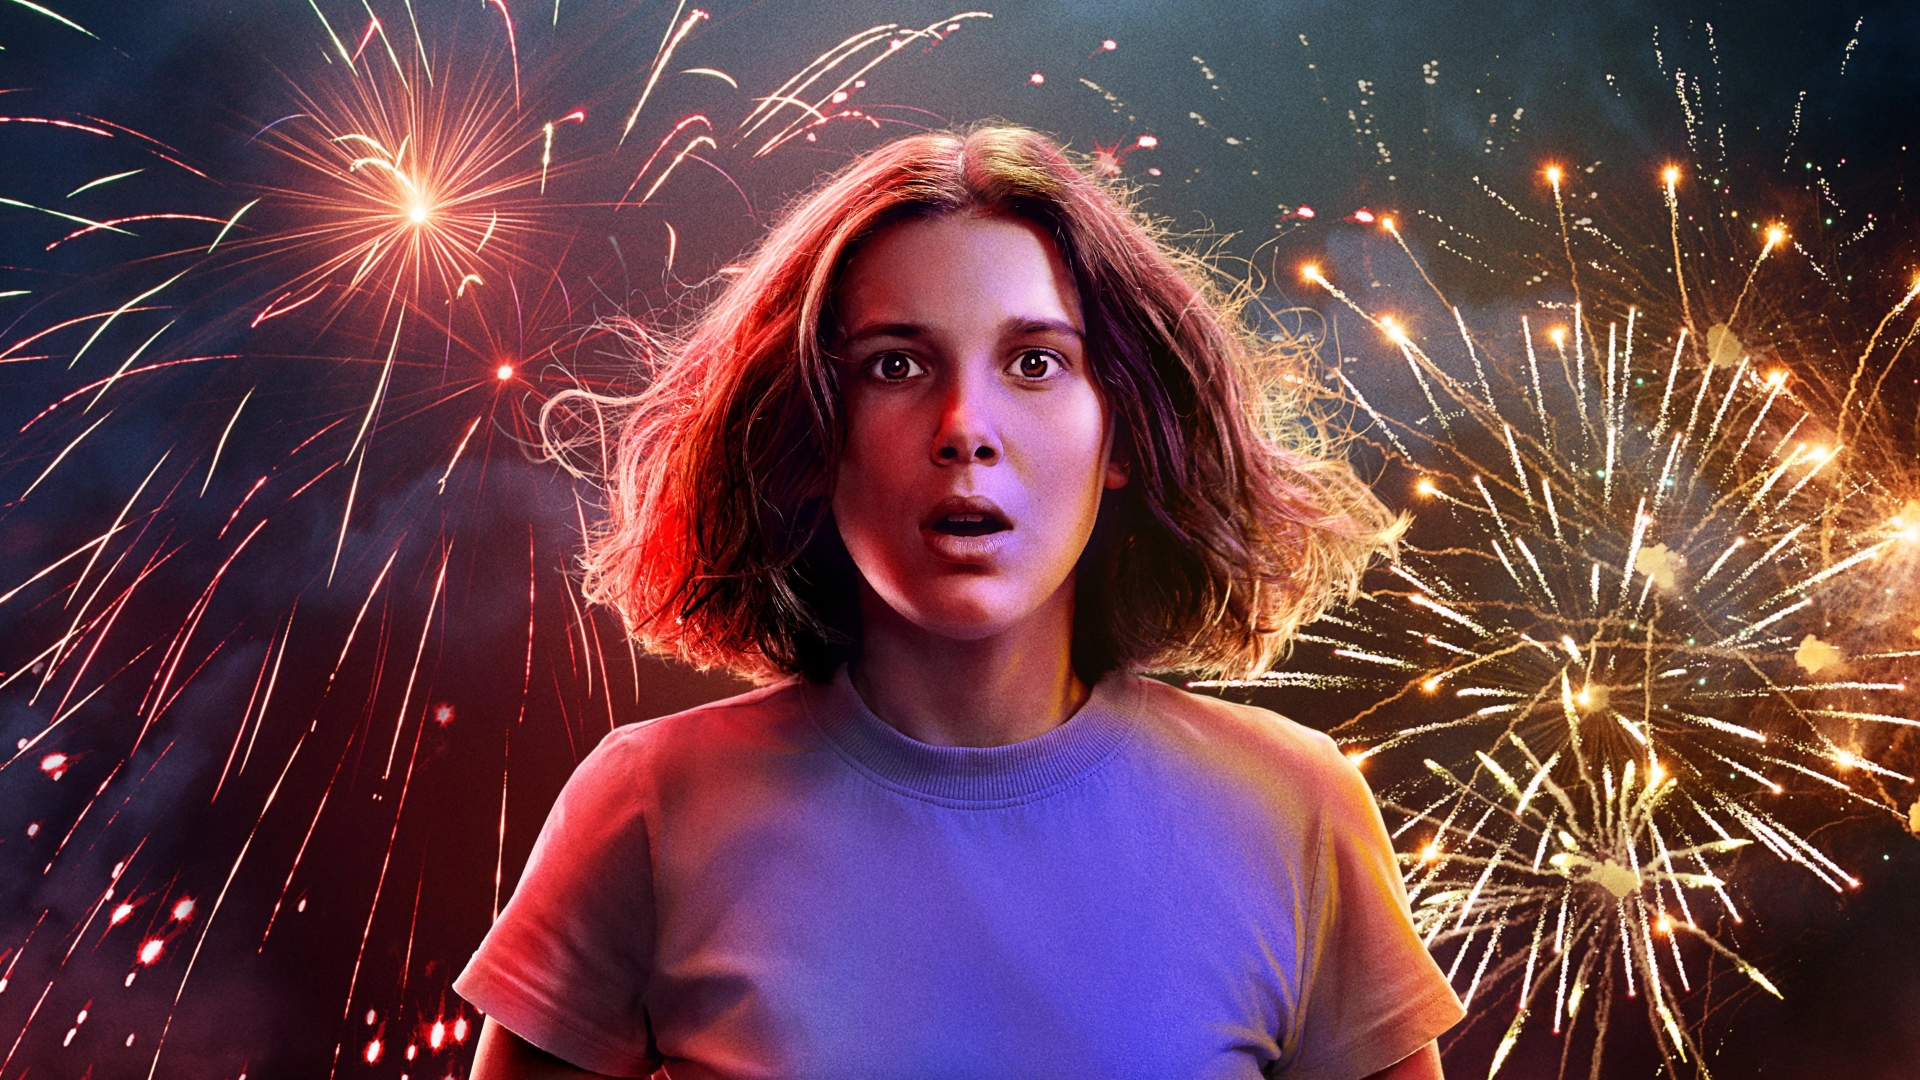 Millie Bobby Brown As Eleven Stranger Things Poster